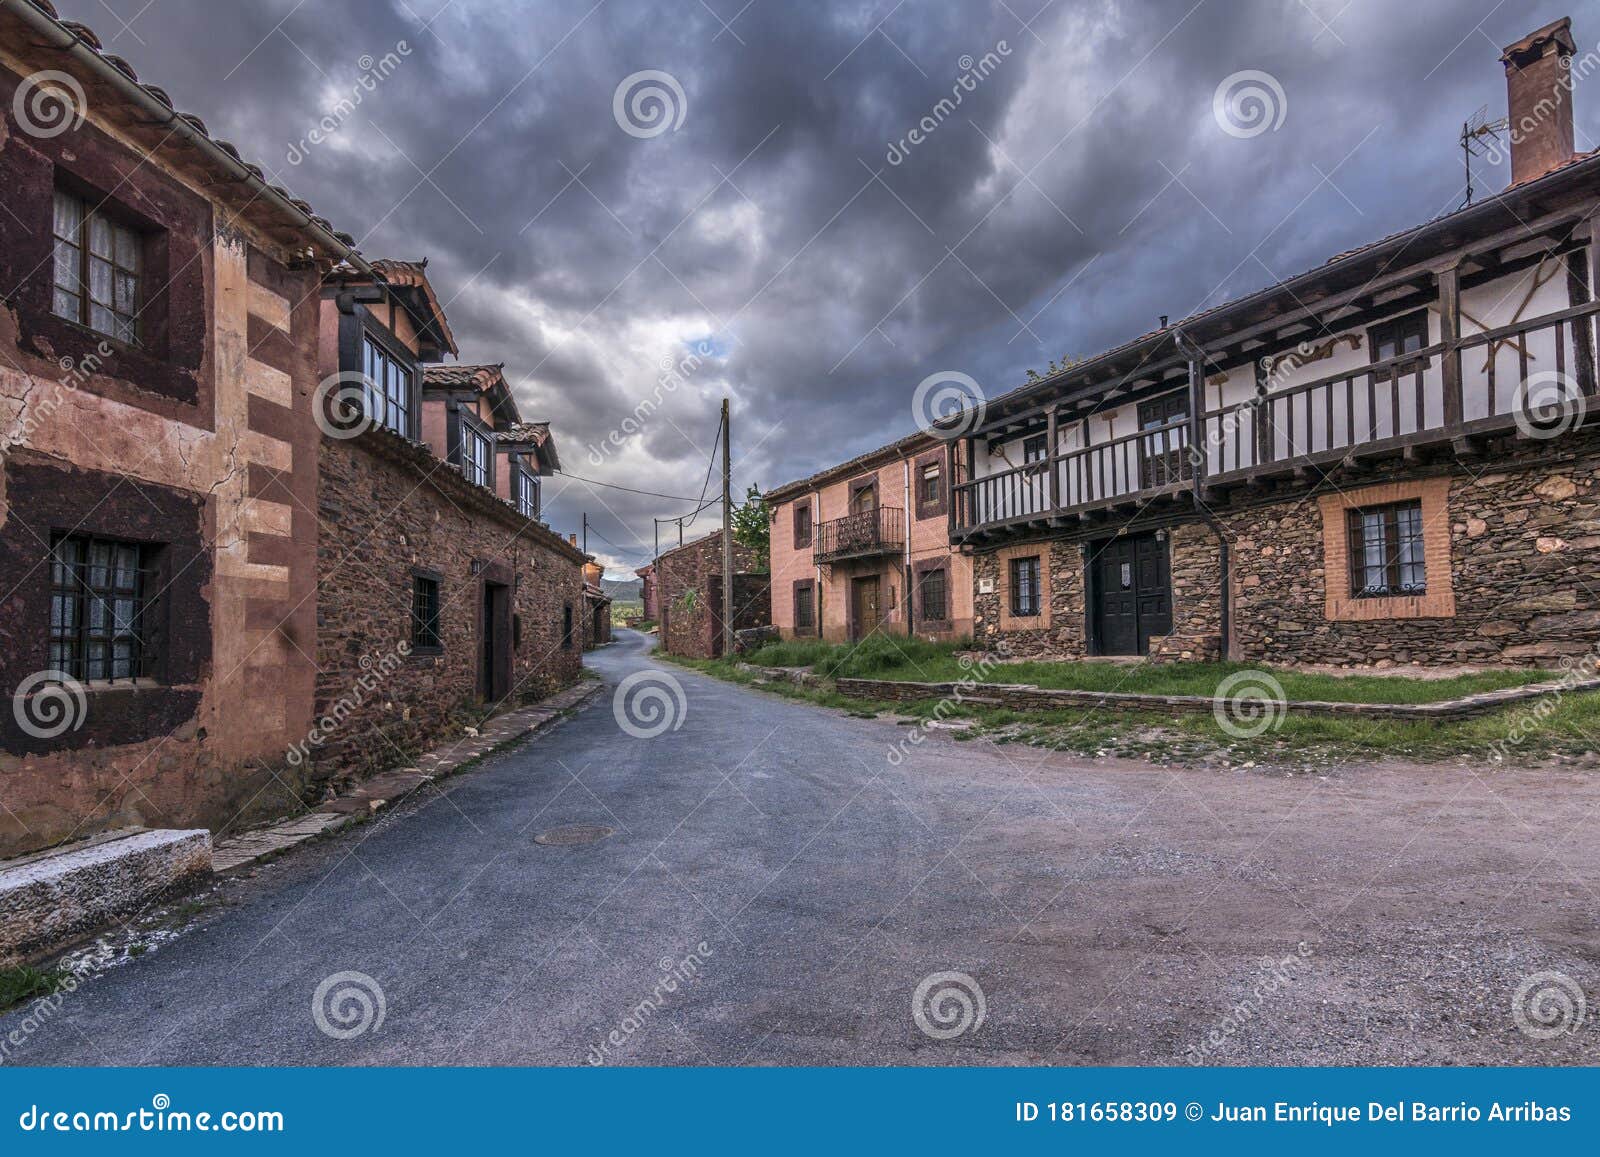 madriguera, red village of the riaza region province of segovia spain